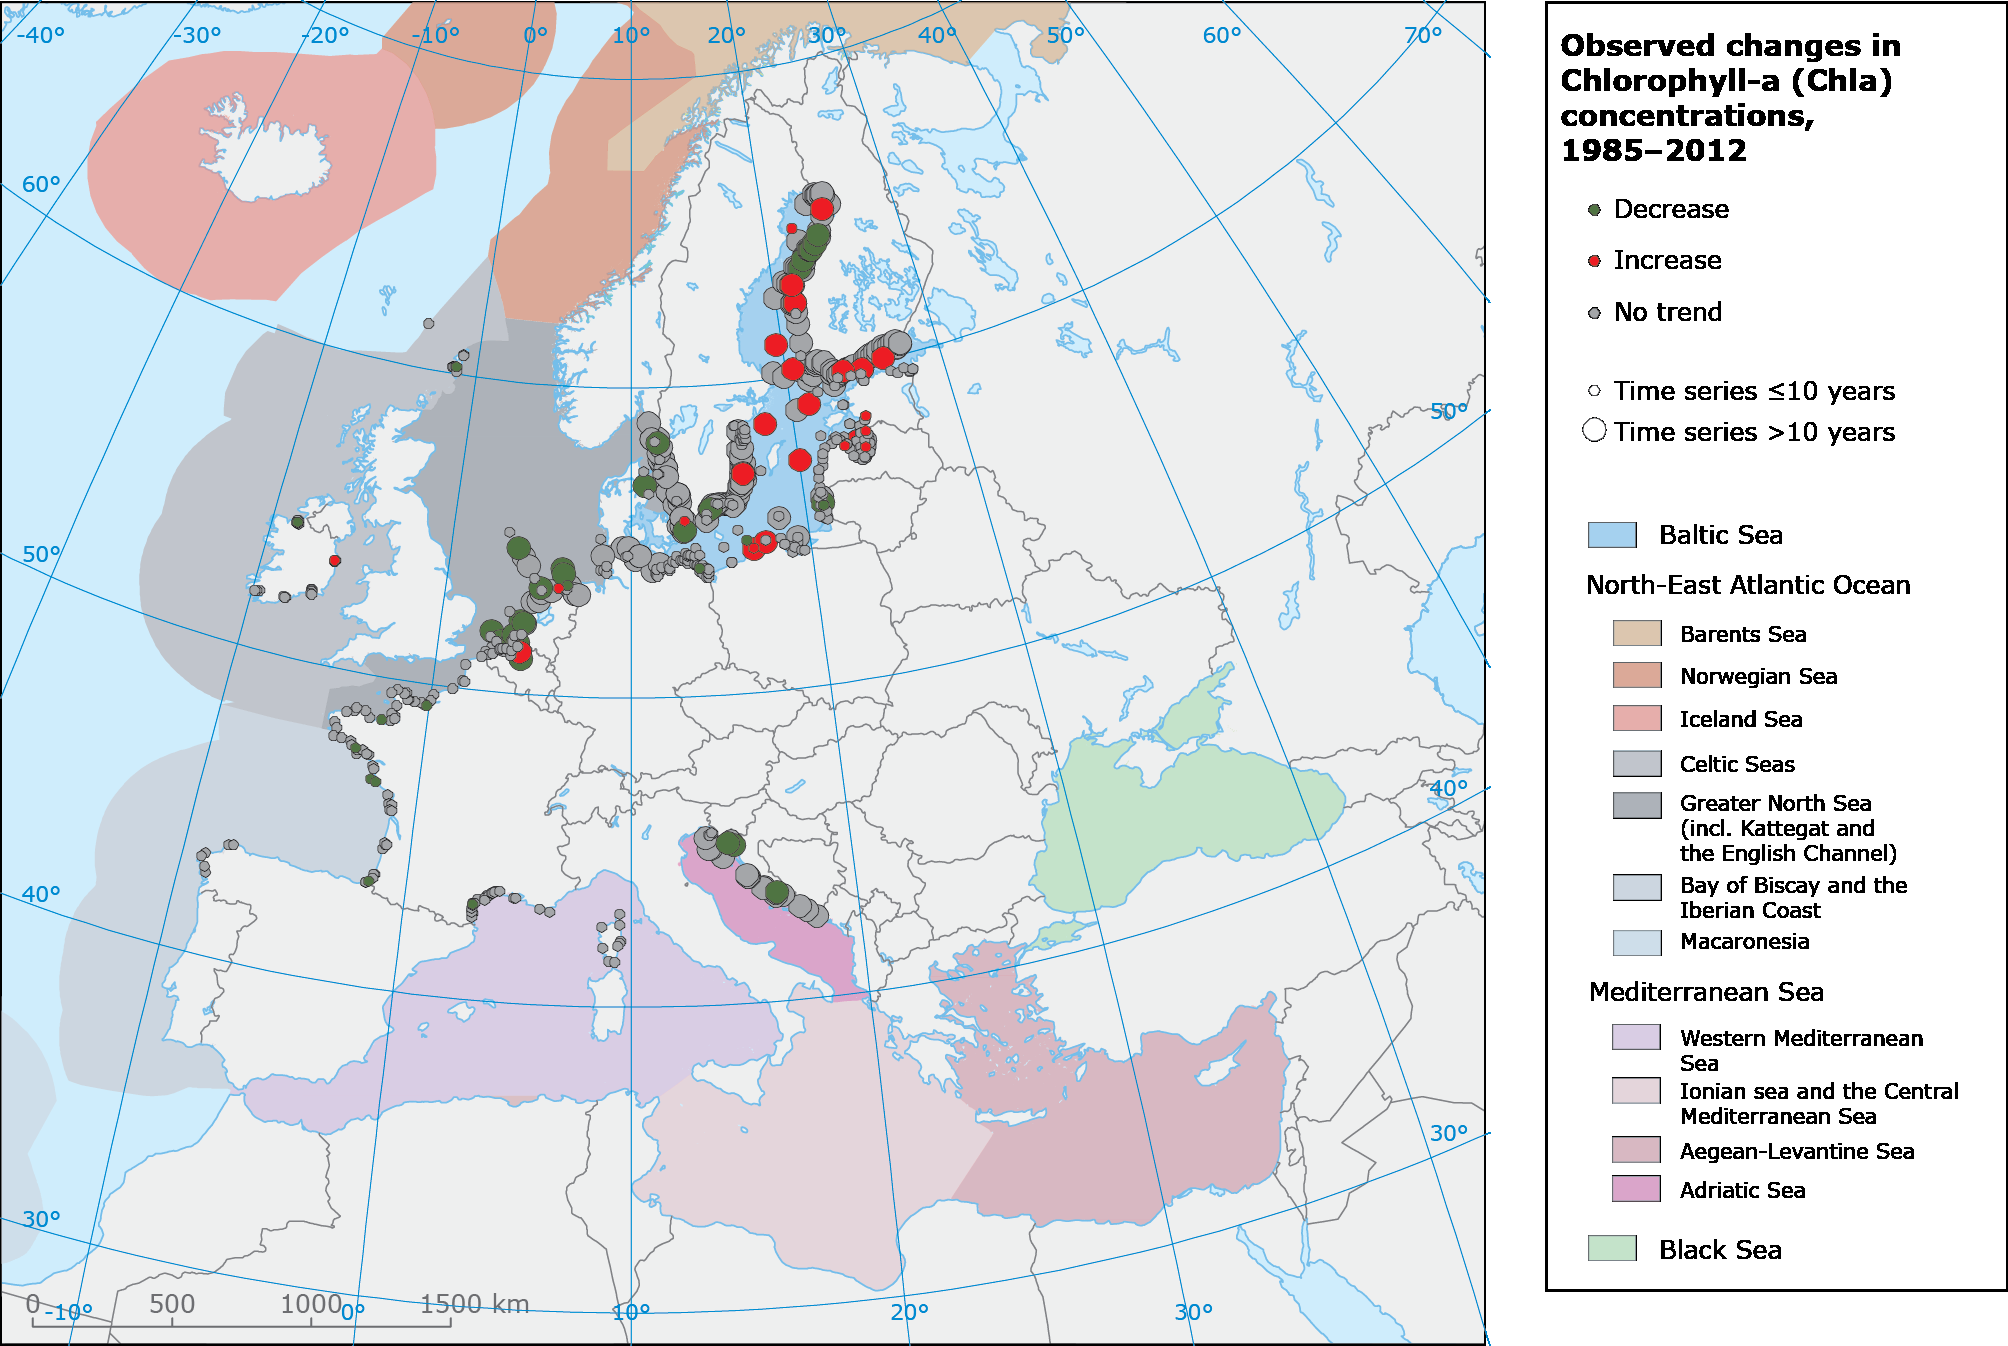 Trends per station in chlorophyll-a concentrations in European seas